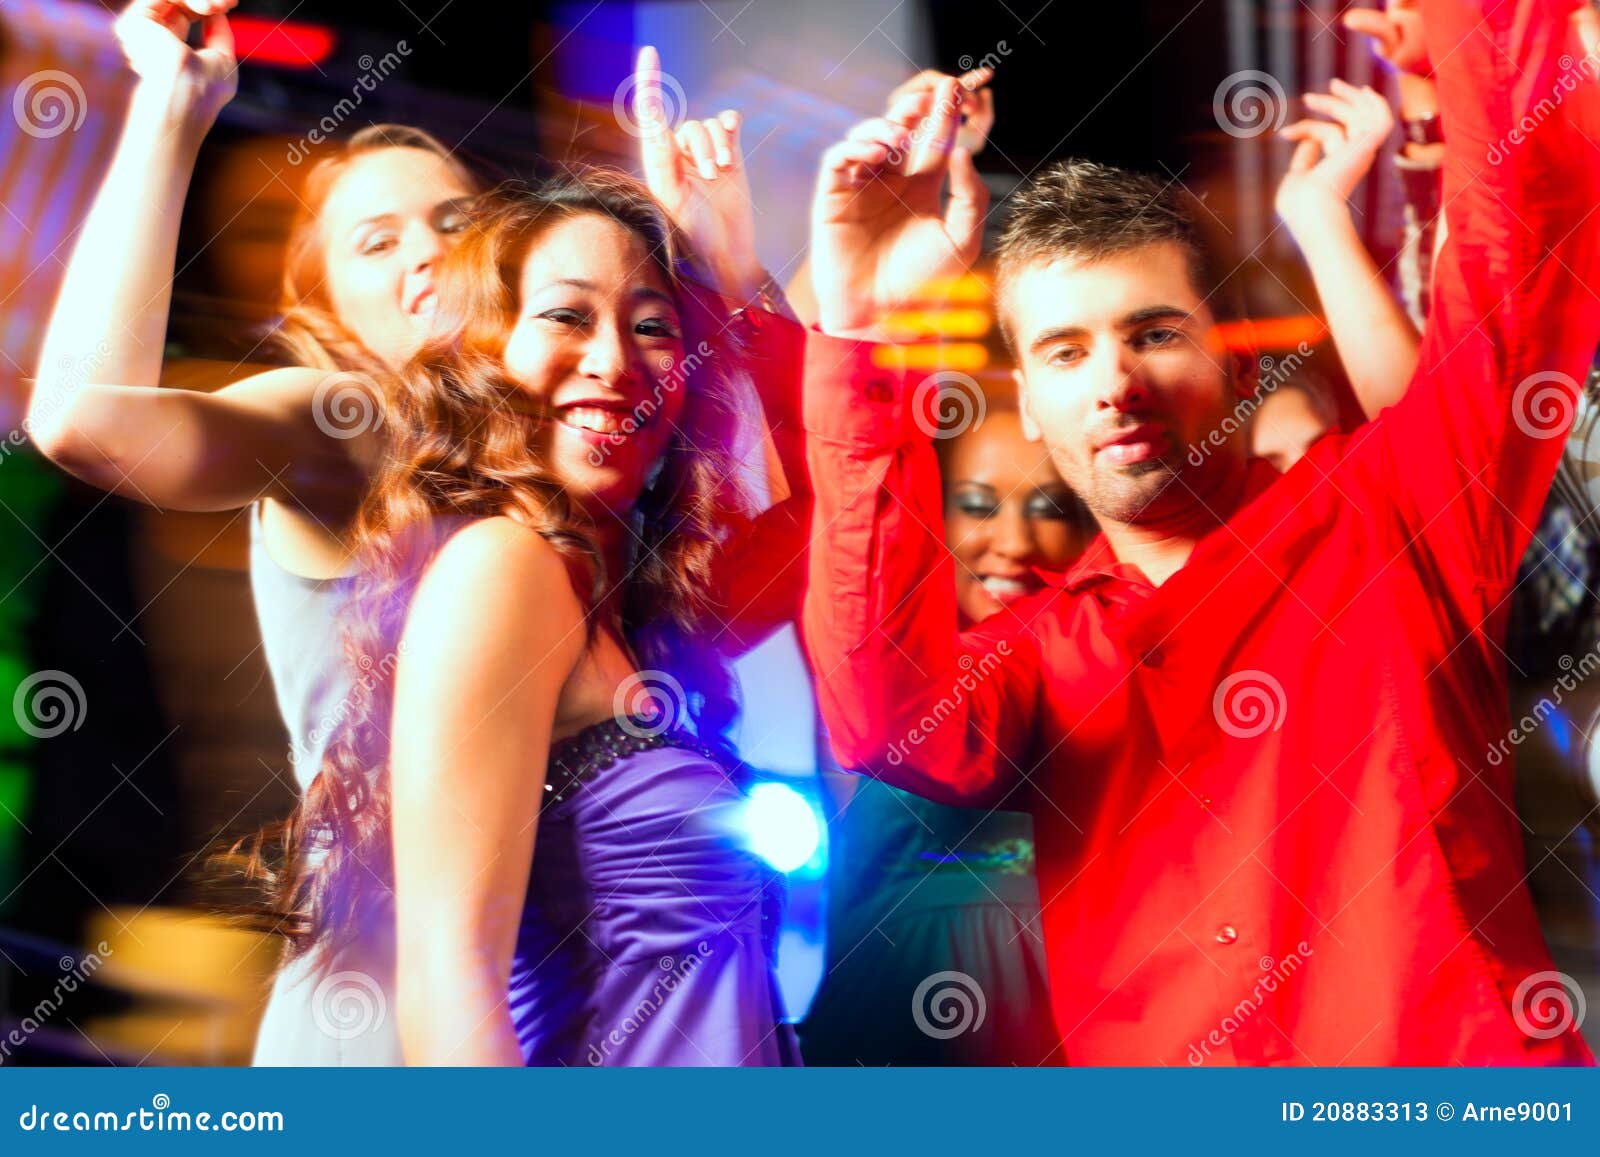 Party People Dancing in Disco or Club Stock Image - Image of asian ...